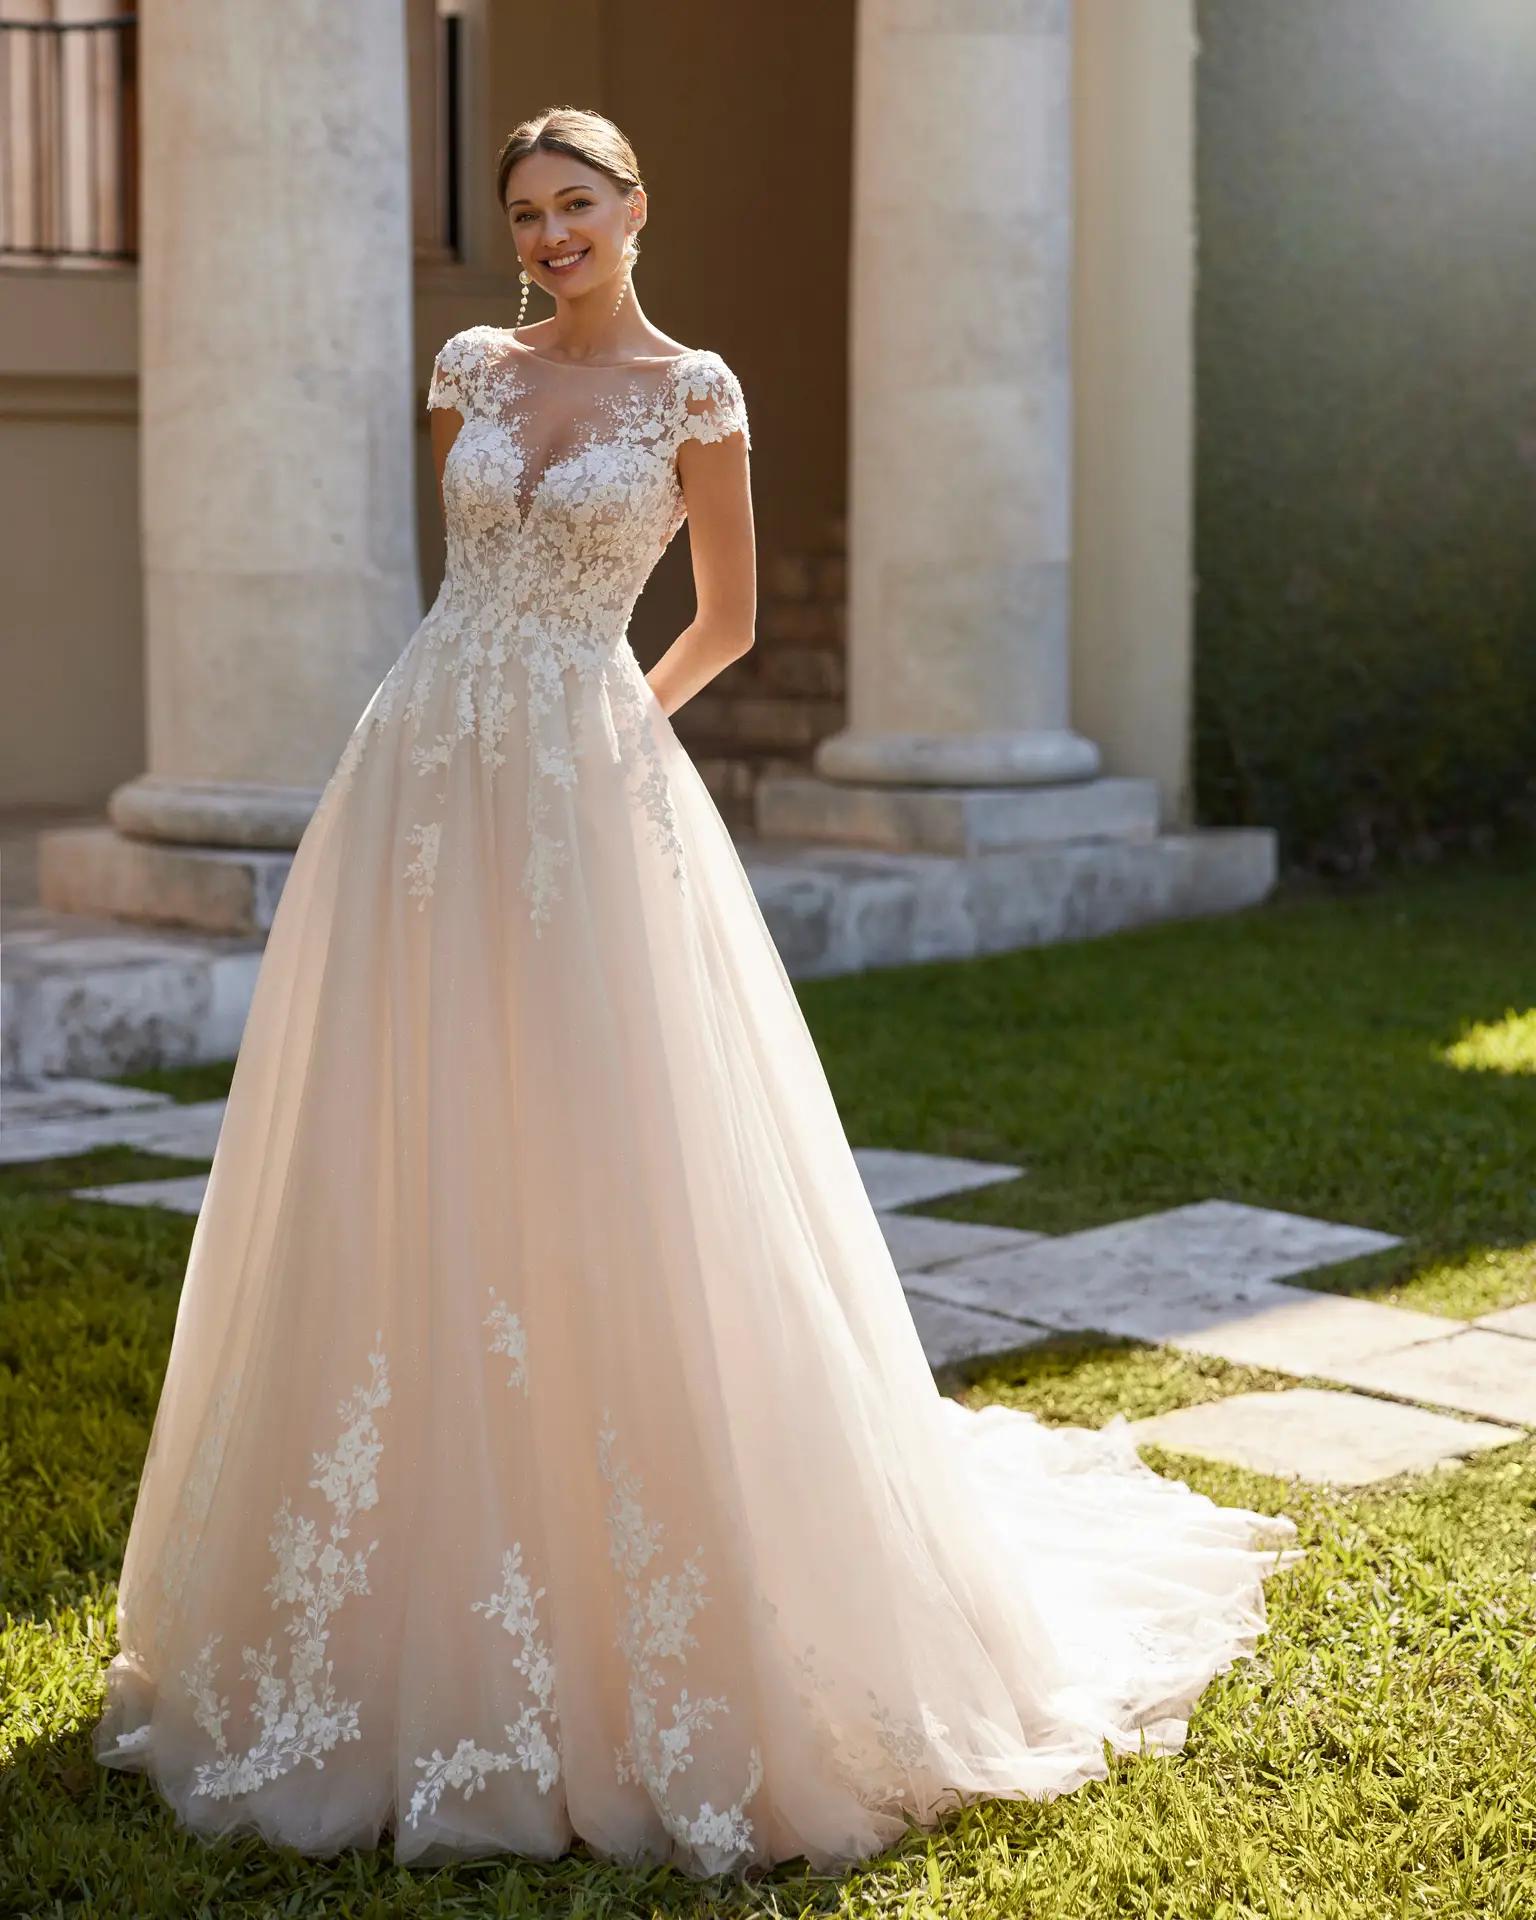 Blush wedding dress with cap sleeves and illusion V neckline by Rosa Clara in Columbus, Ohio style Ennis